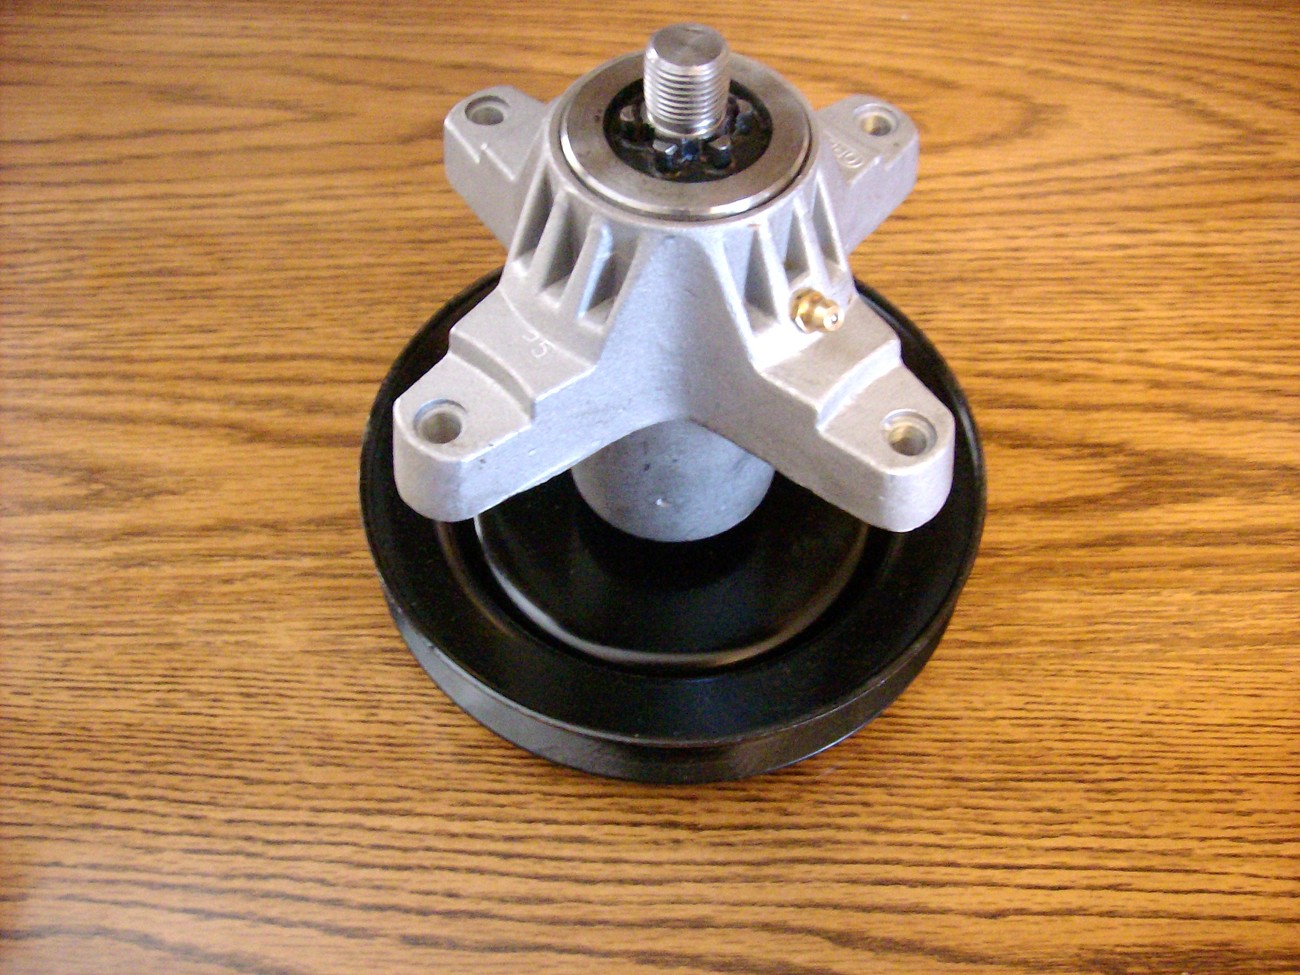 Primary image for Cub Cadet, MTD, Toro 42" Cut Deck Spindle with Pulley 918-04456, 918-04461